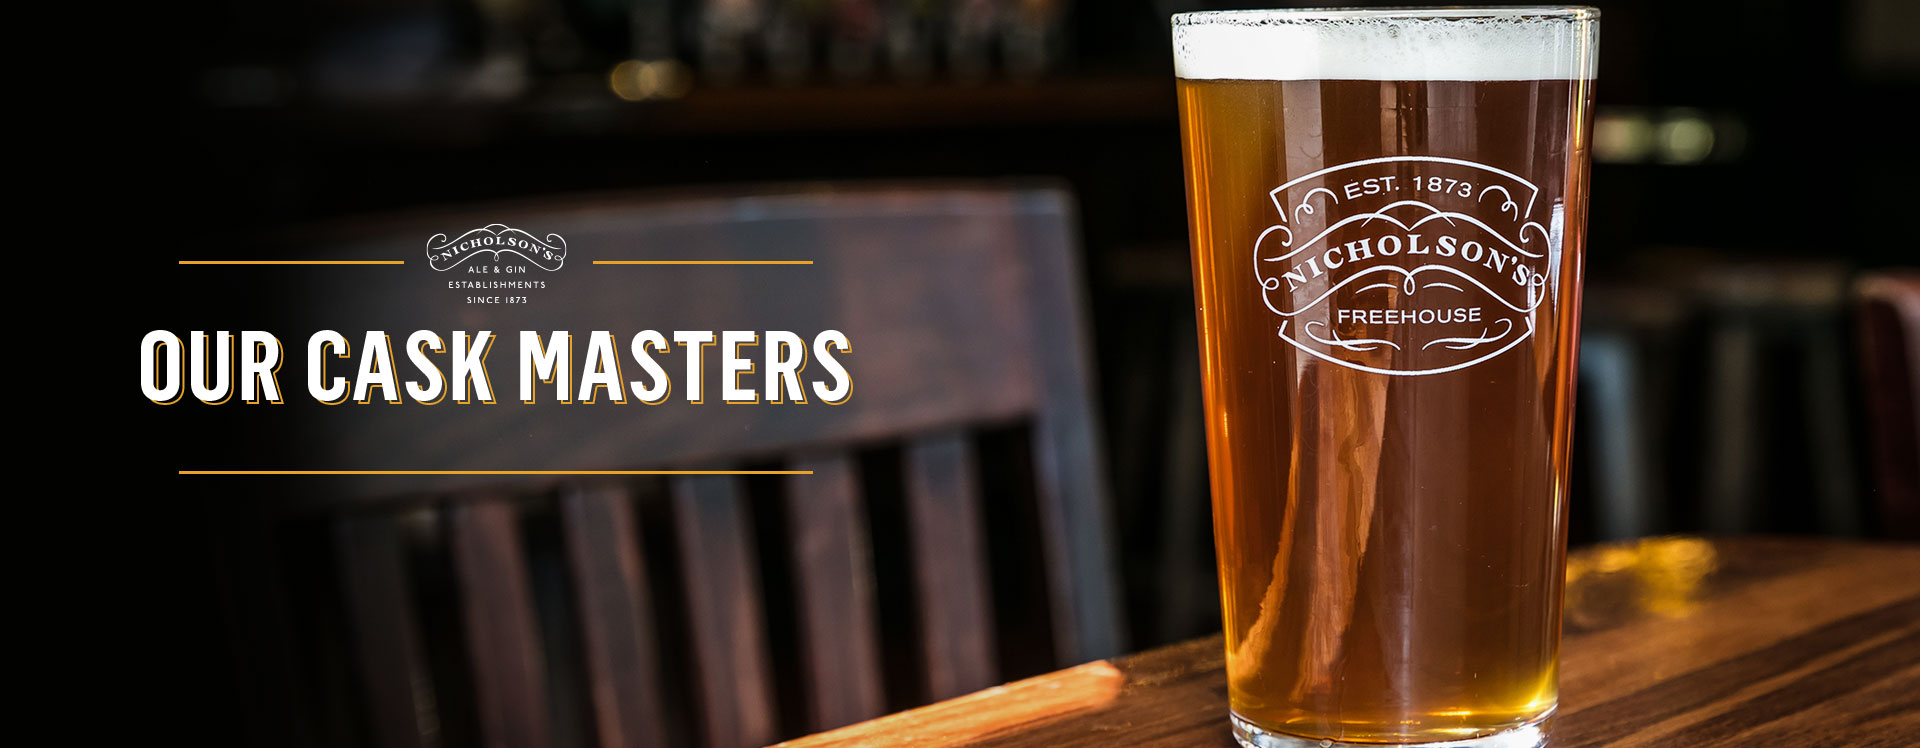 cask masters